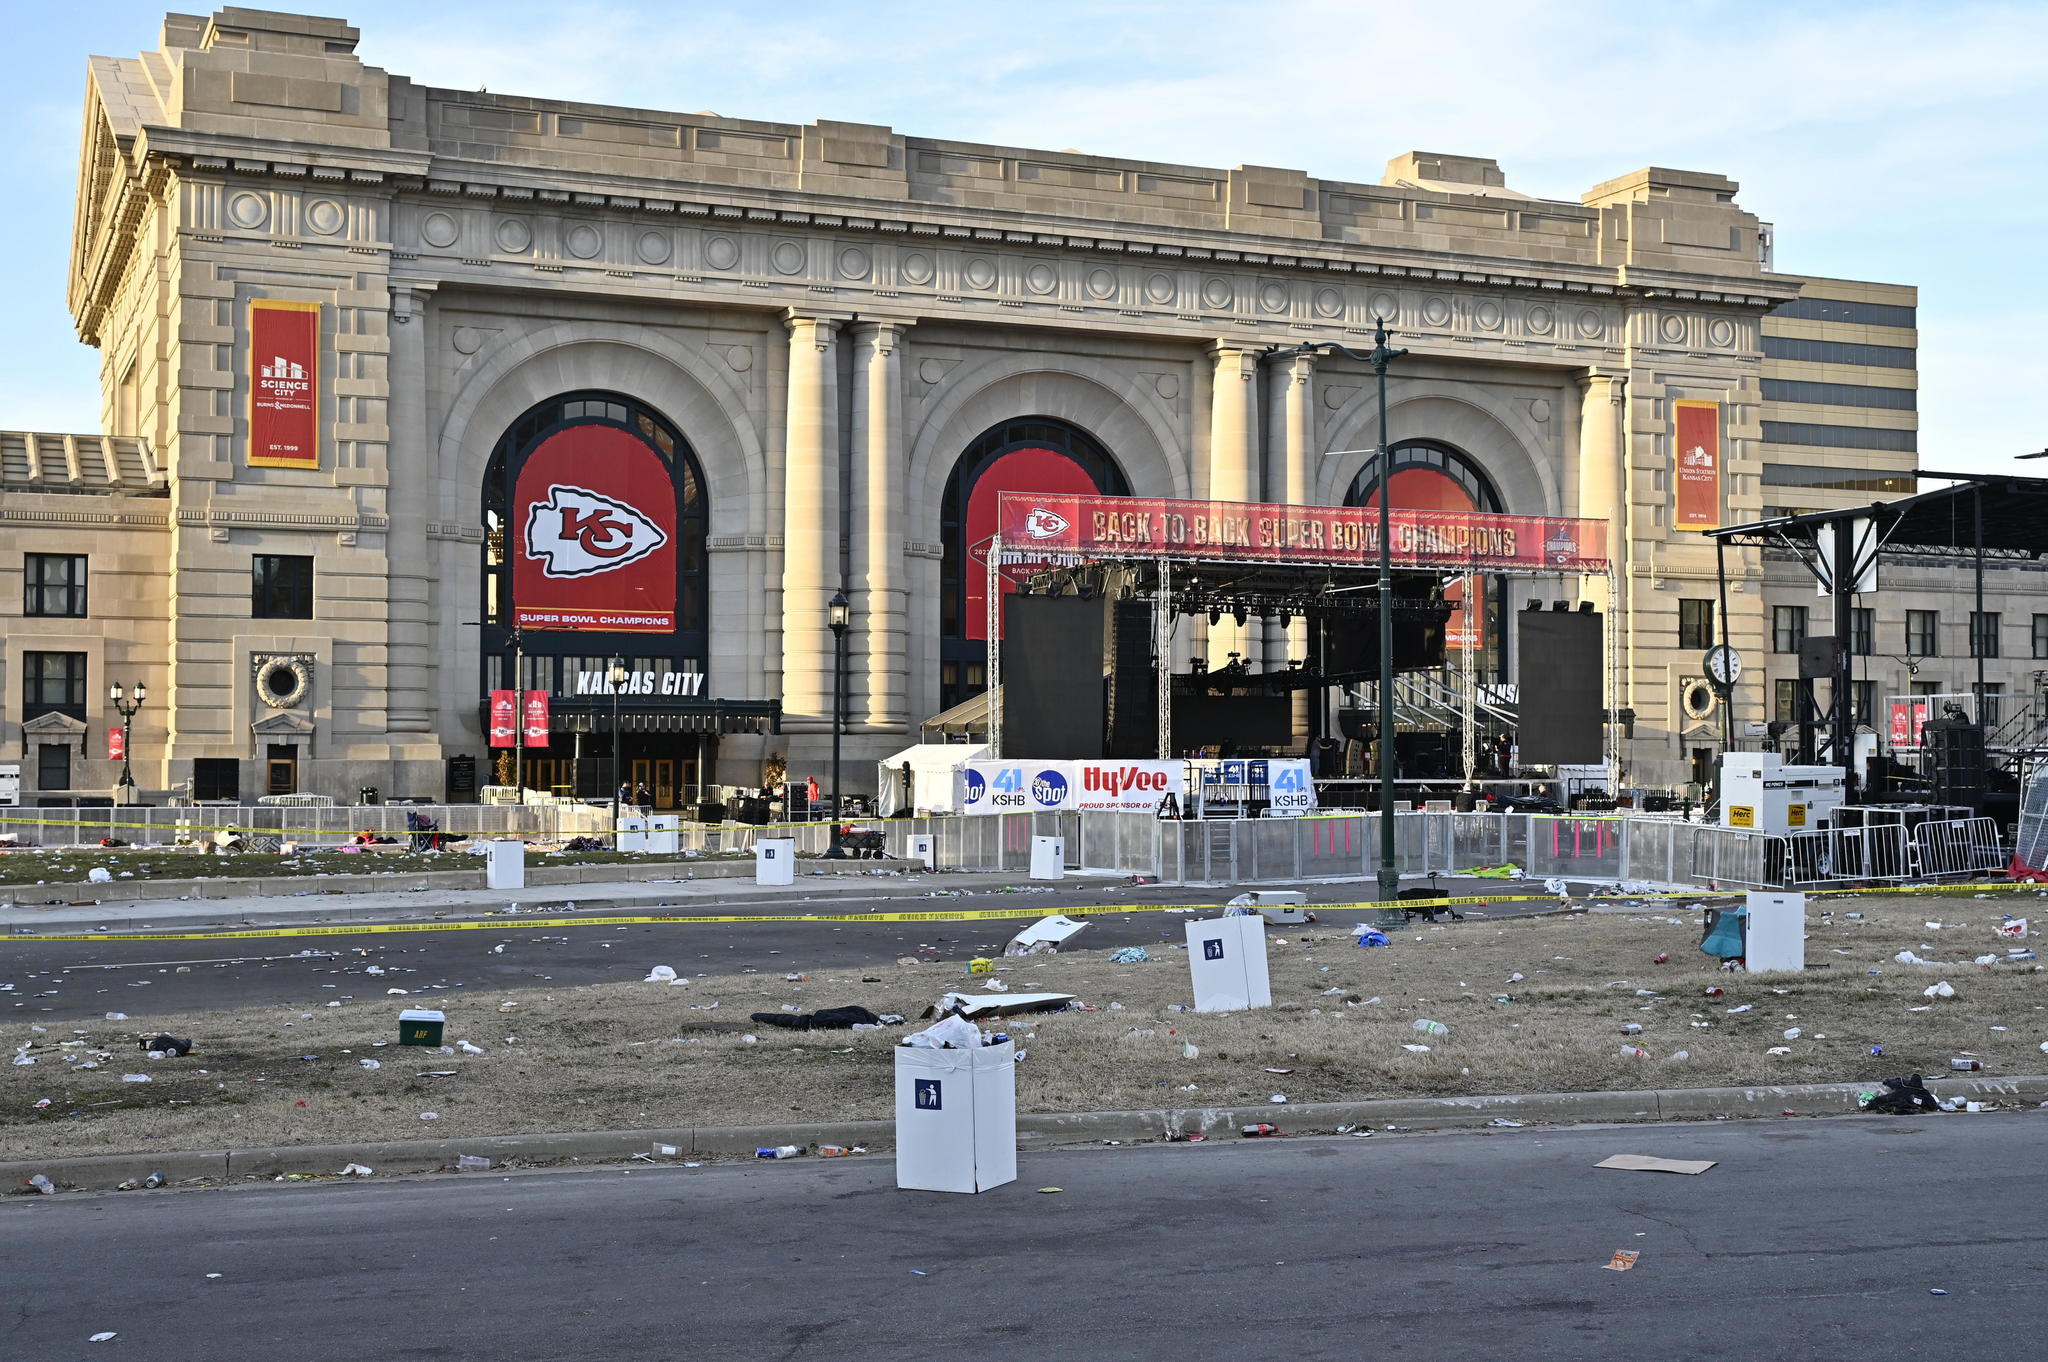 A view of the area around Union Station after the shooting